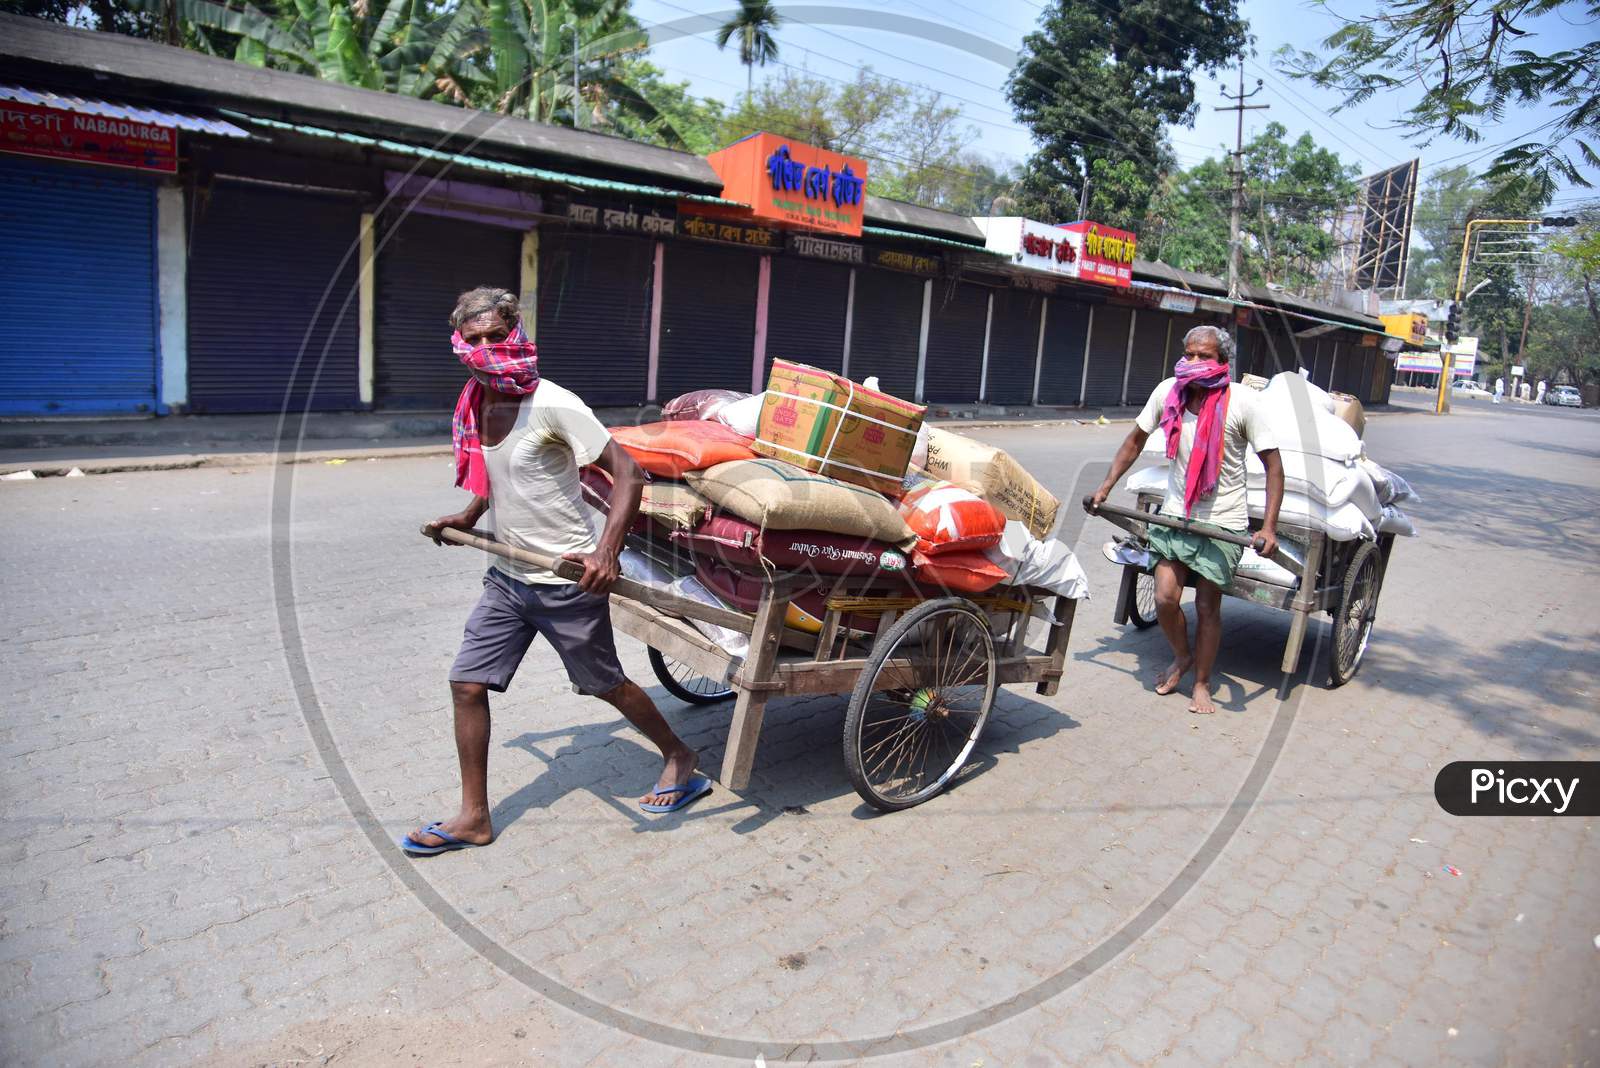 Workers  Push A Cart With  Groceries During A Nationwide Lockdown In The Wake Of Coronavirus Pandemic, In Nagaon District Of Assam ,India